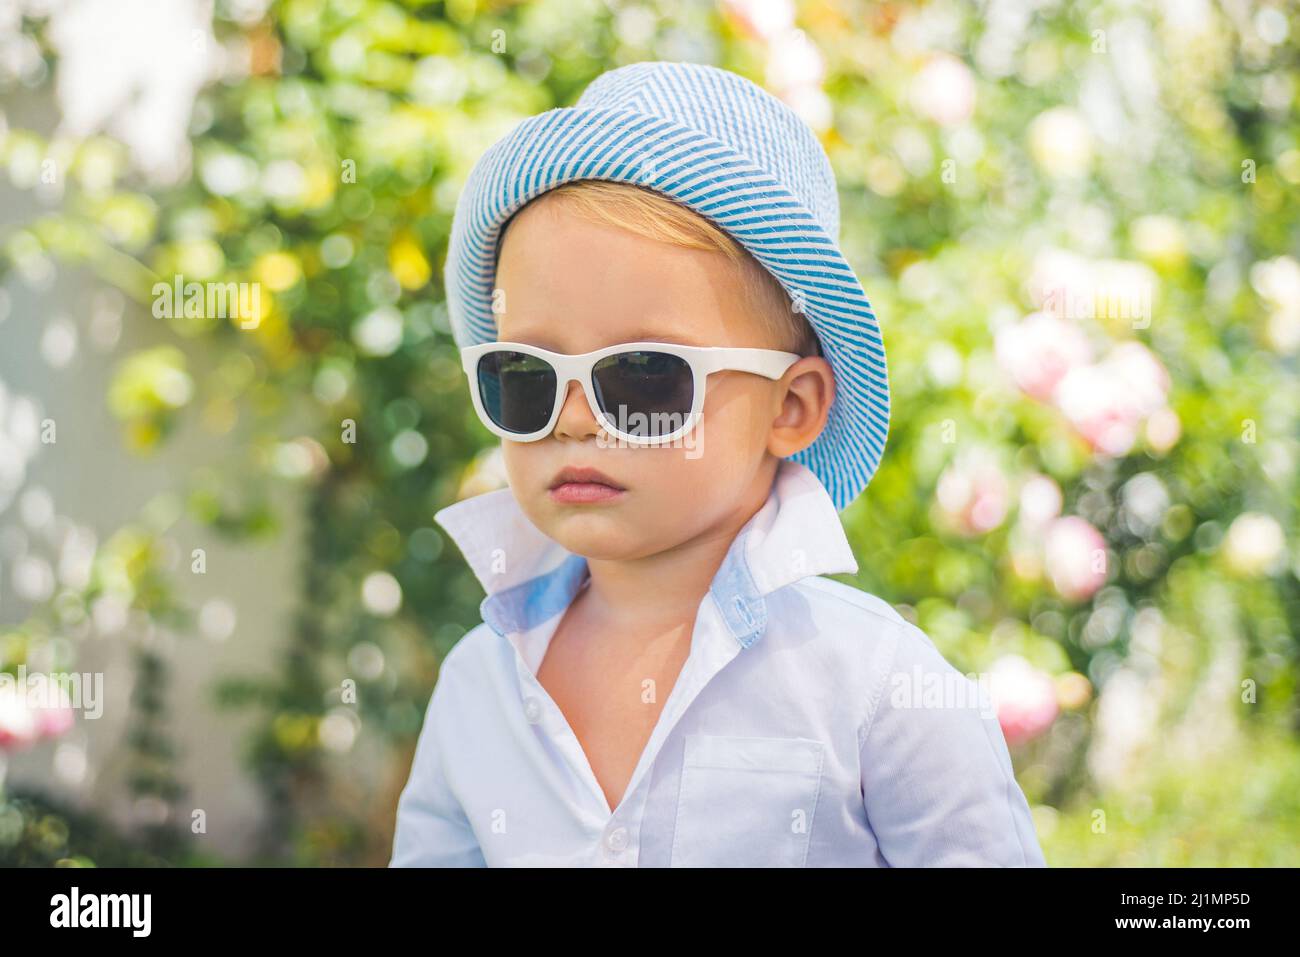 Kids fashion. Happy child in sunglasses and hat, adorable lovely kid. Joyful portrait of small child on green nature background outside. Stock Photo